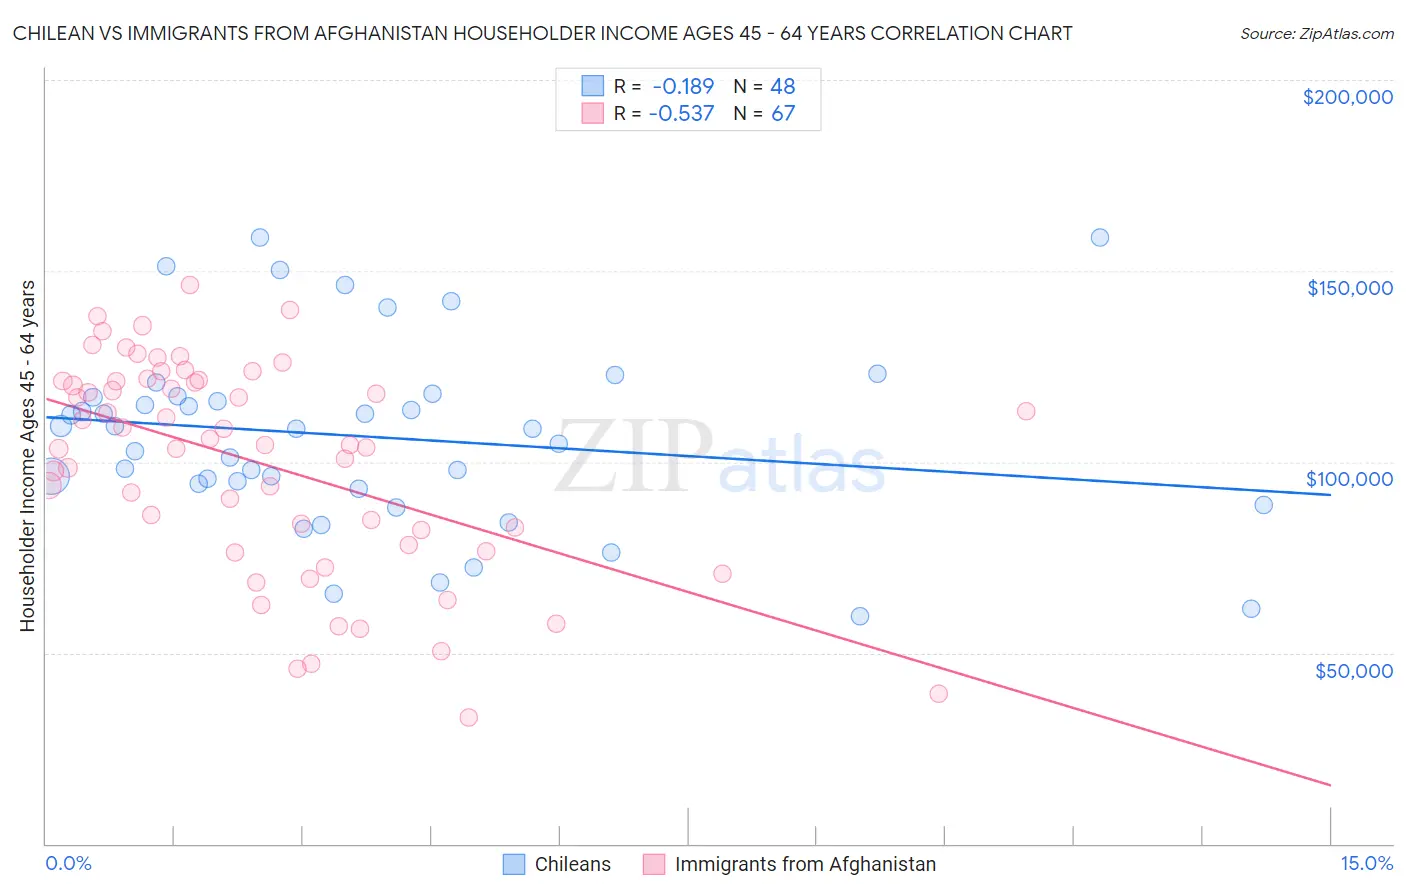 Chilean vs Immigrants from Afghanistan Householder Income Ages 45 - 64 years